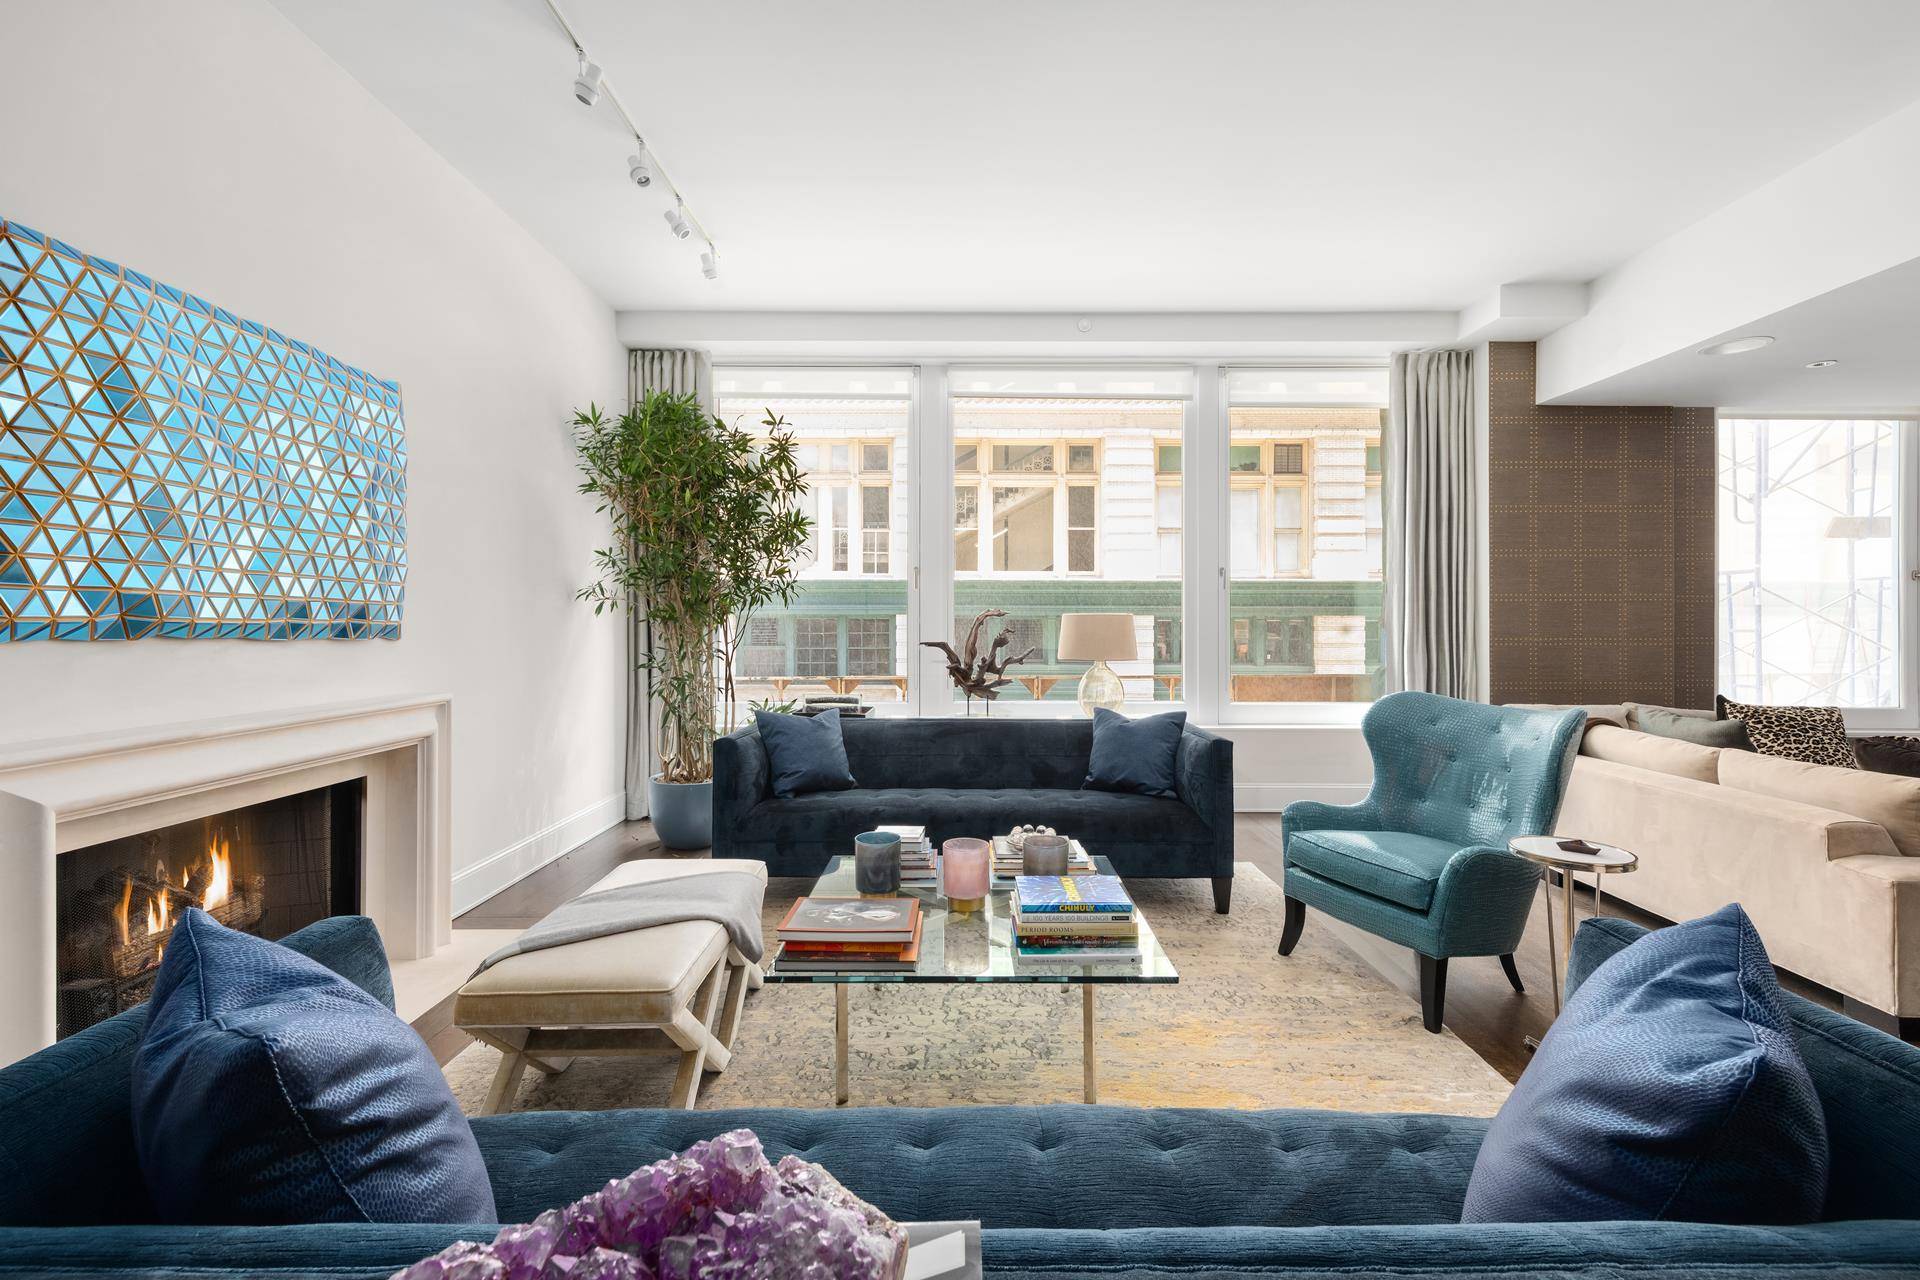 Centrally located in the heart of Flatiron, Chelsea and Gramercy, this exclusive boutique condominium provides coveted pre war qualities with all modern services and conveniences.